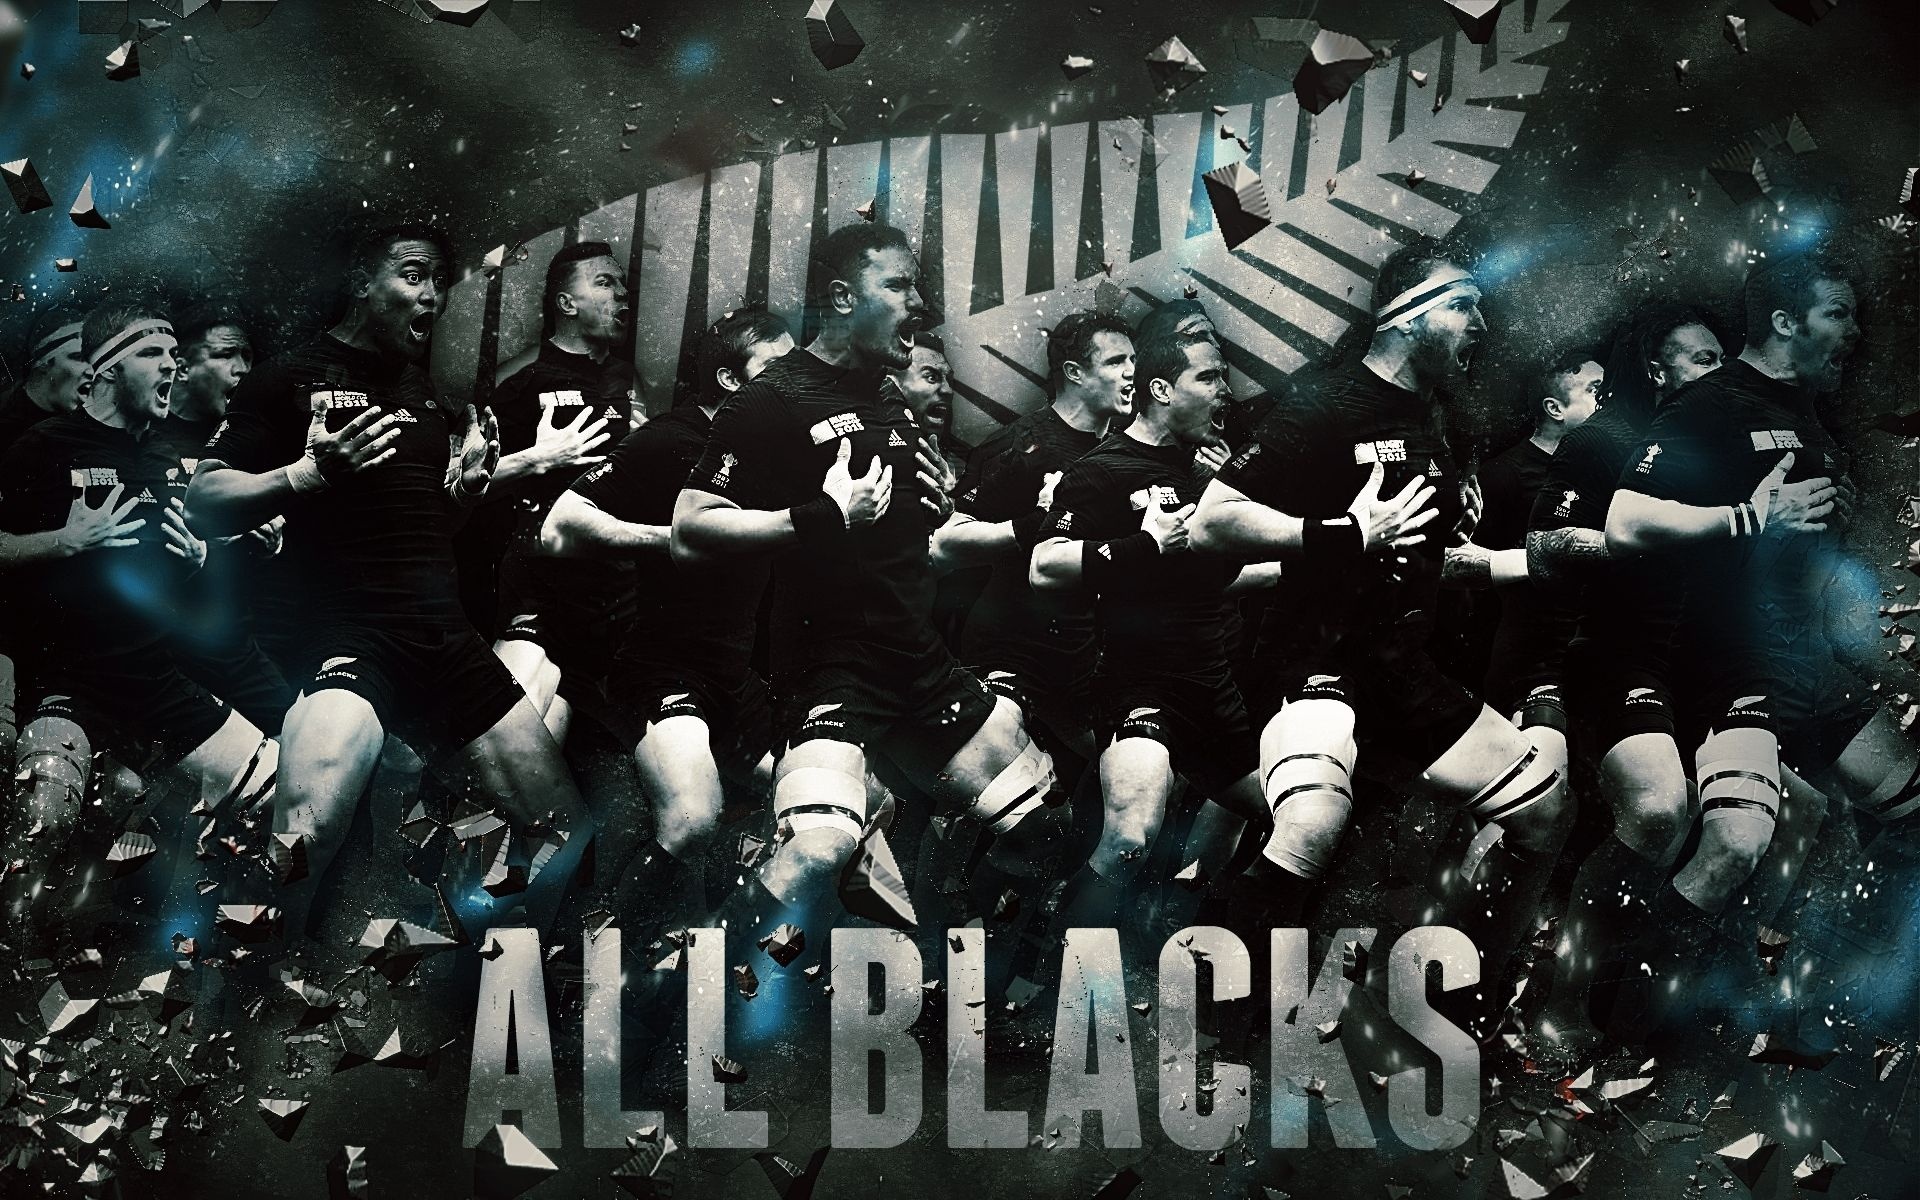 Rugby League: Monochrome fan art of the All Blacks - The New Zealand national union team. 1920x1200 HD Wallpaper.